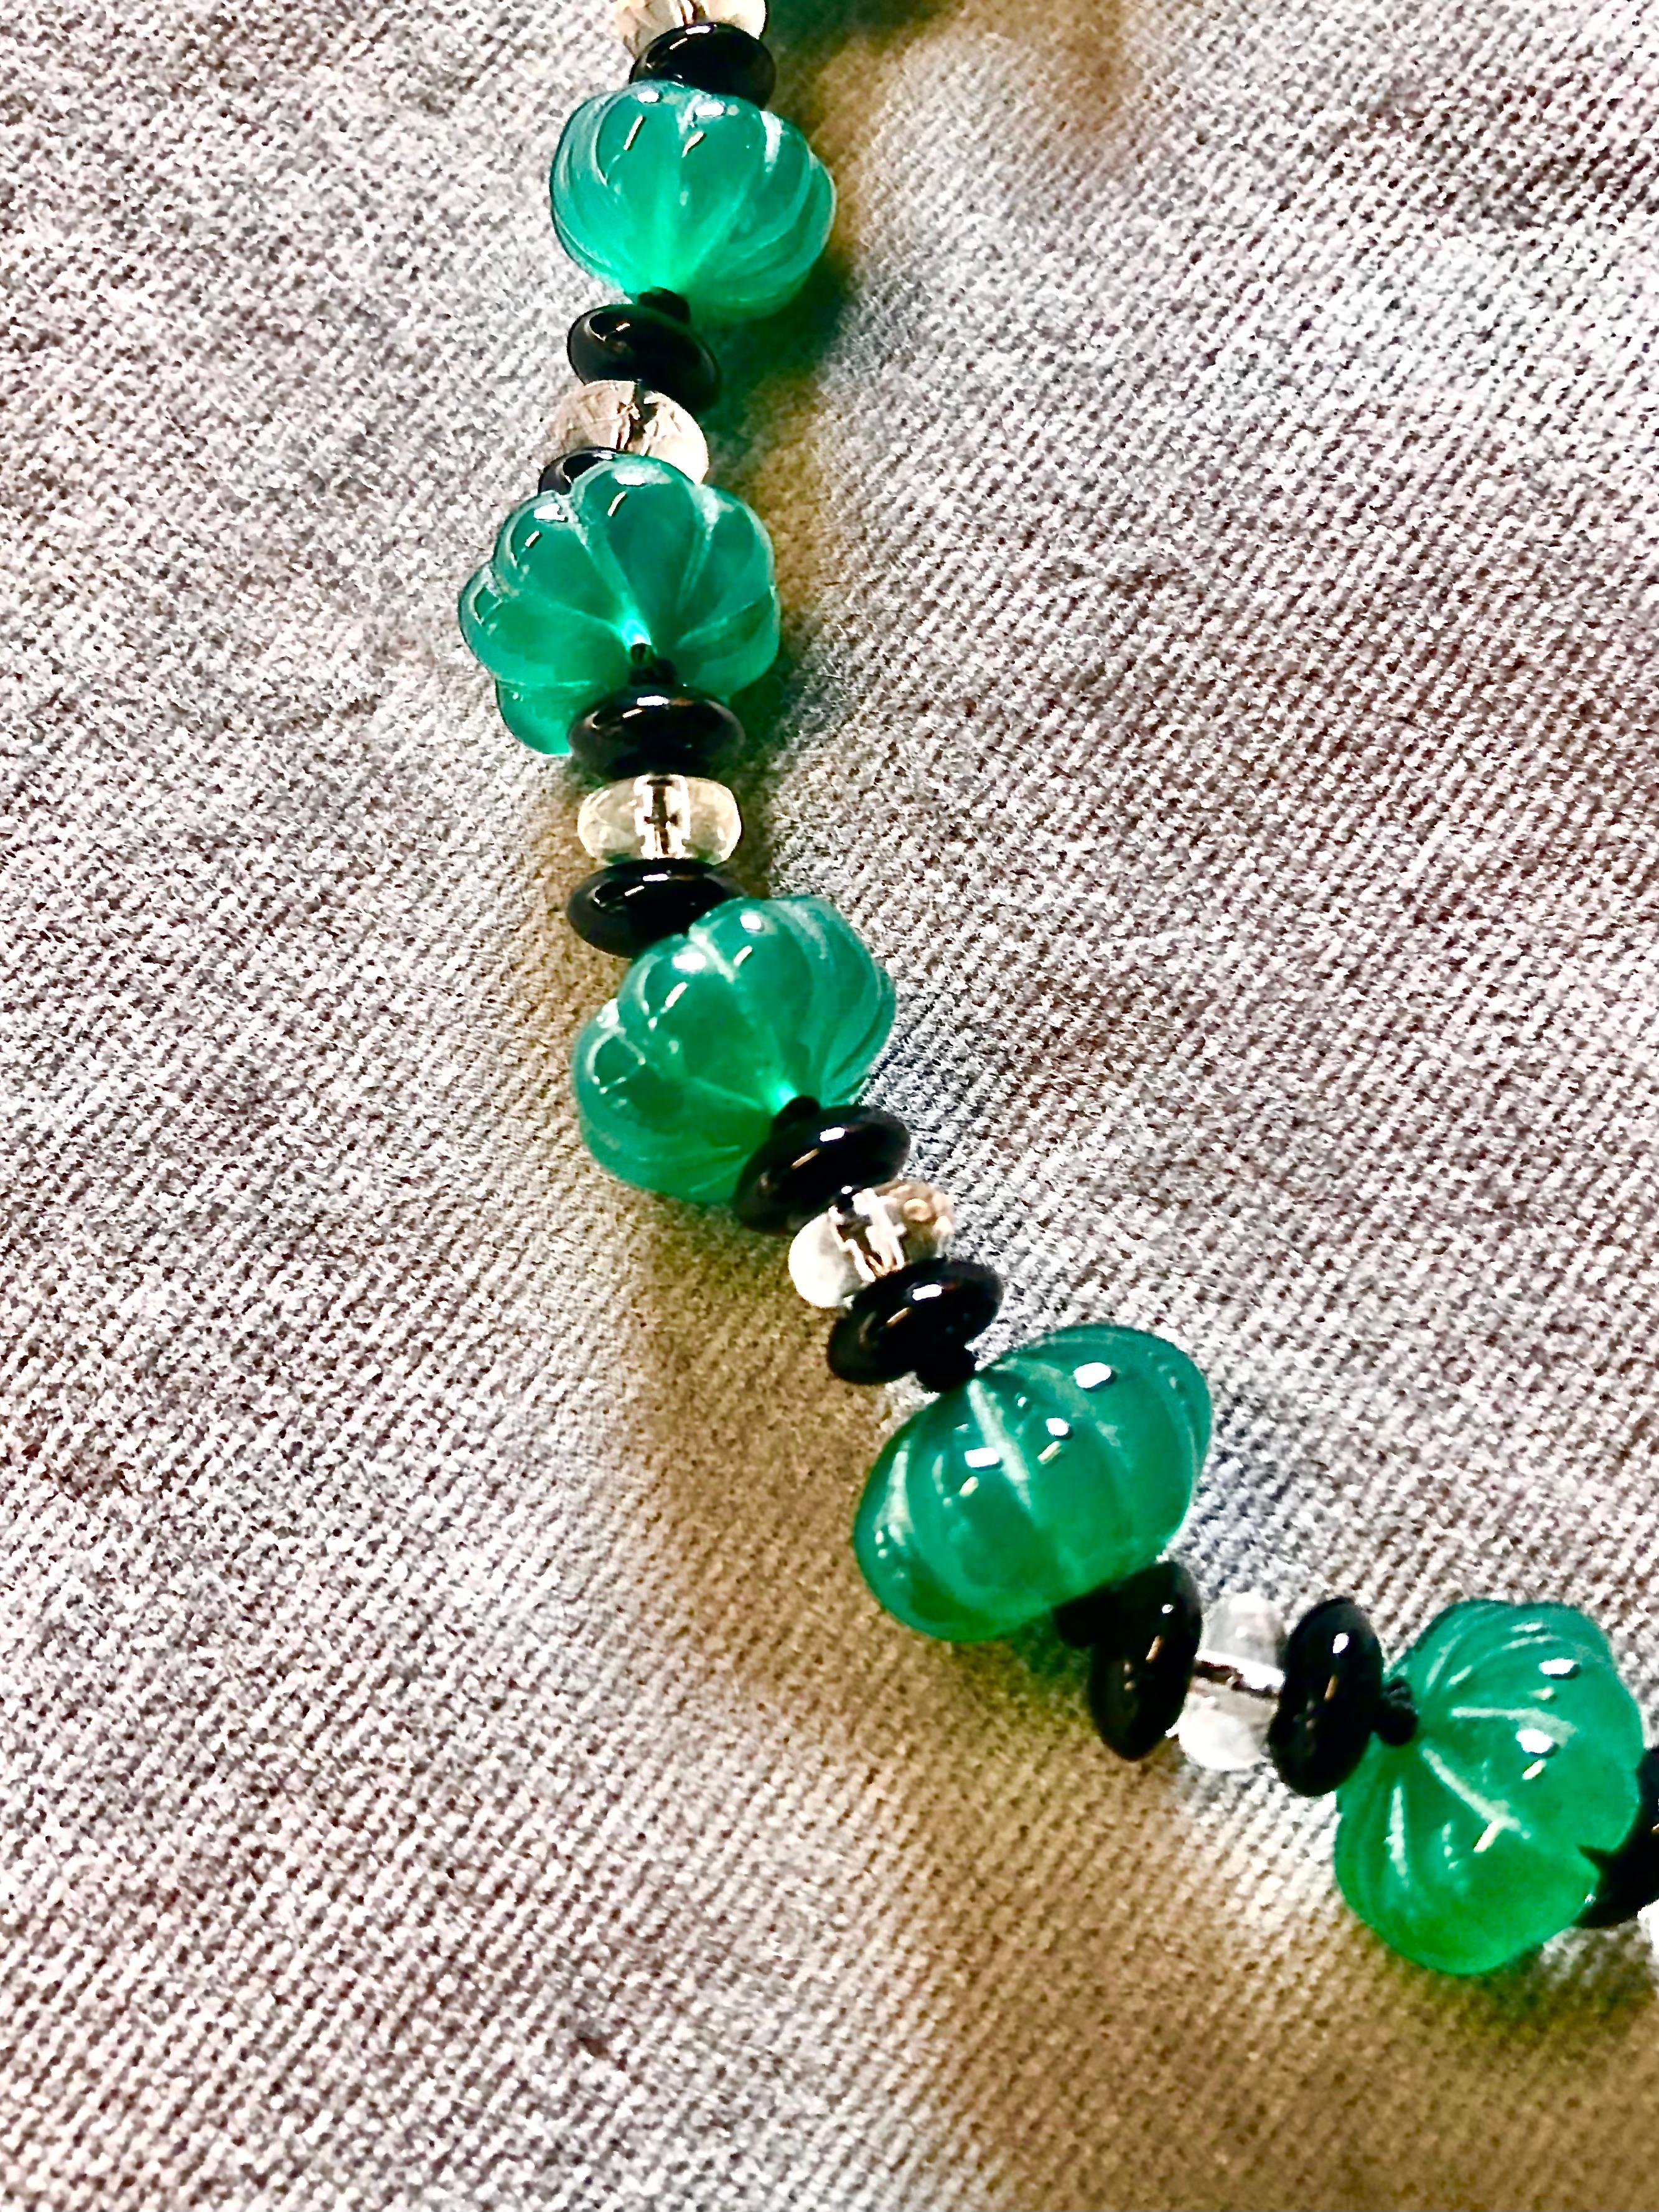 Elegant single strand necklace of translucent green carved melon shaped green onyx rondelles flanked with black onyx rondelles centering on a faceted rock crystal rondelle.

The slightly graduated green onyx melons are the most beautiful glowing